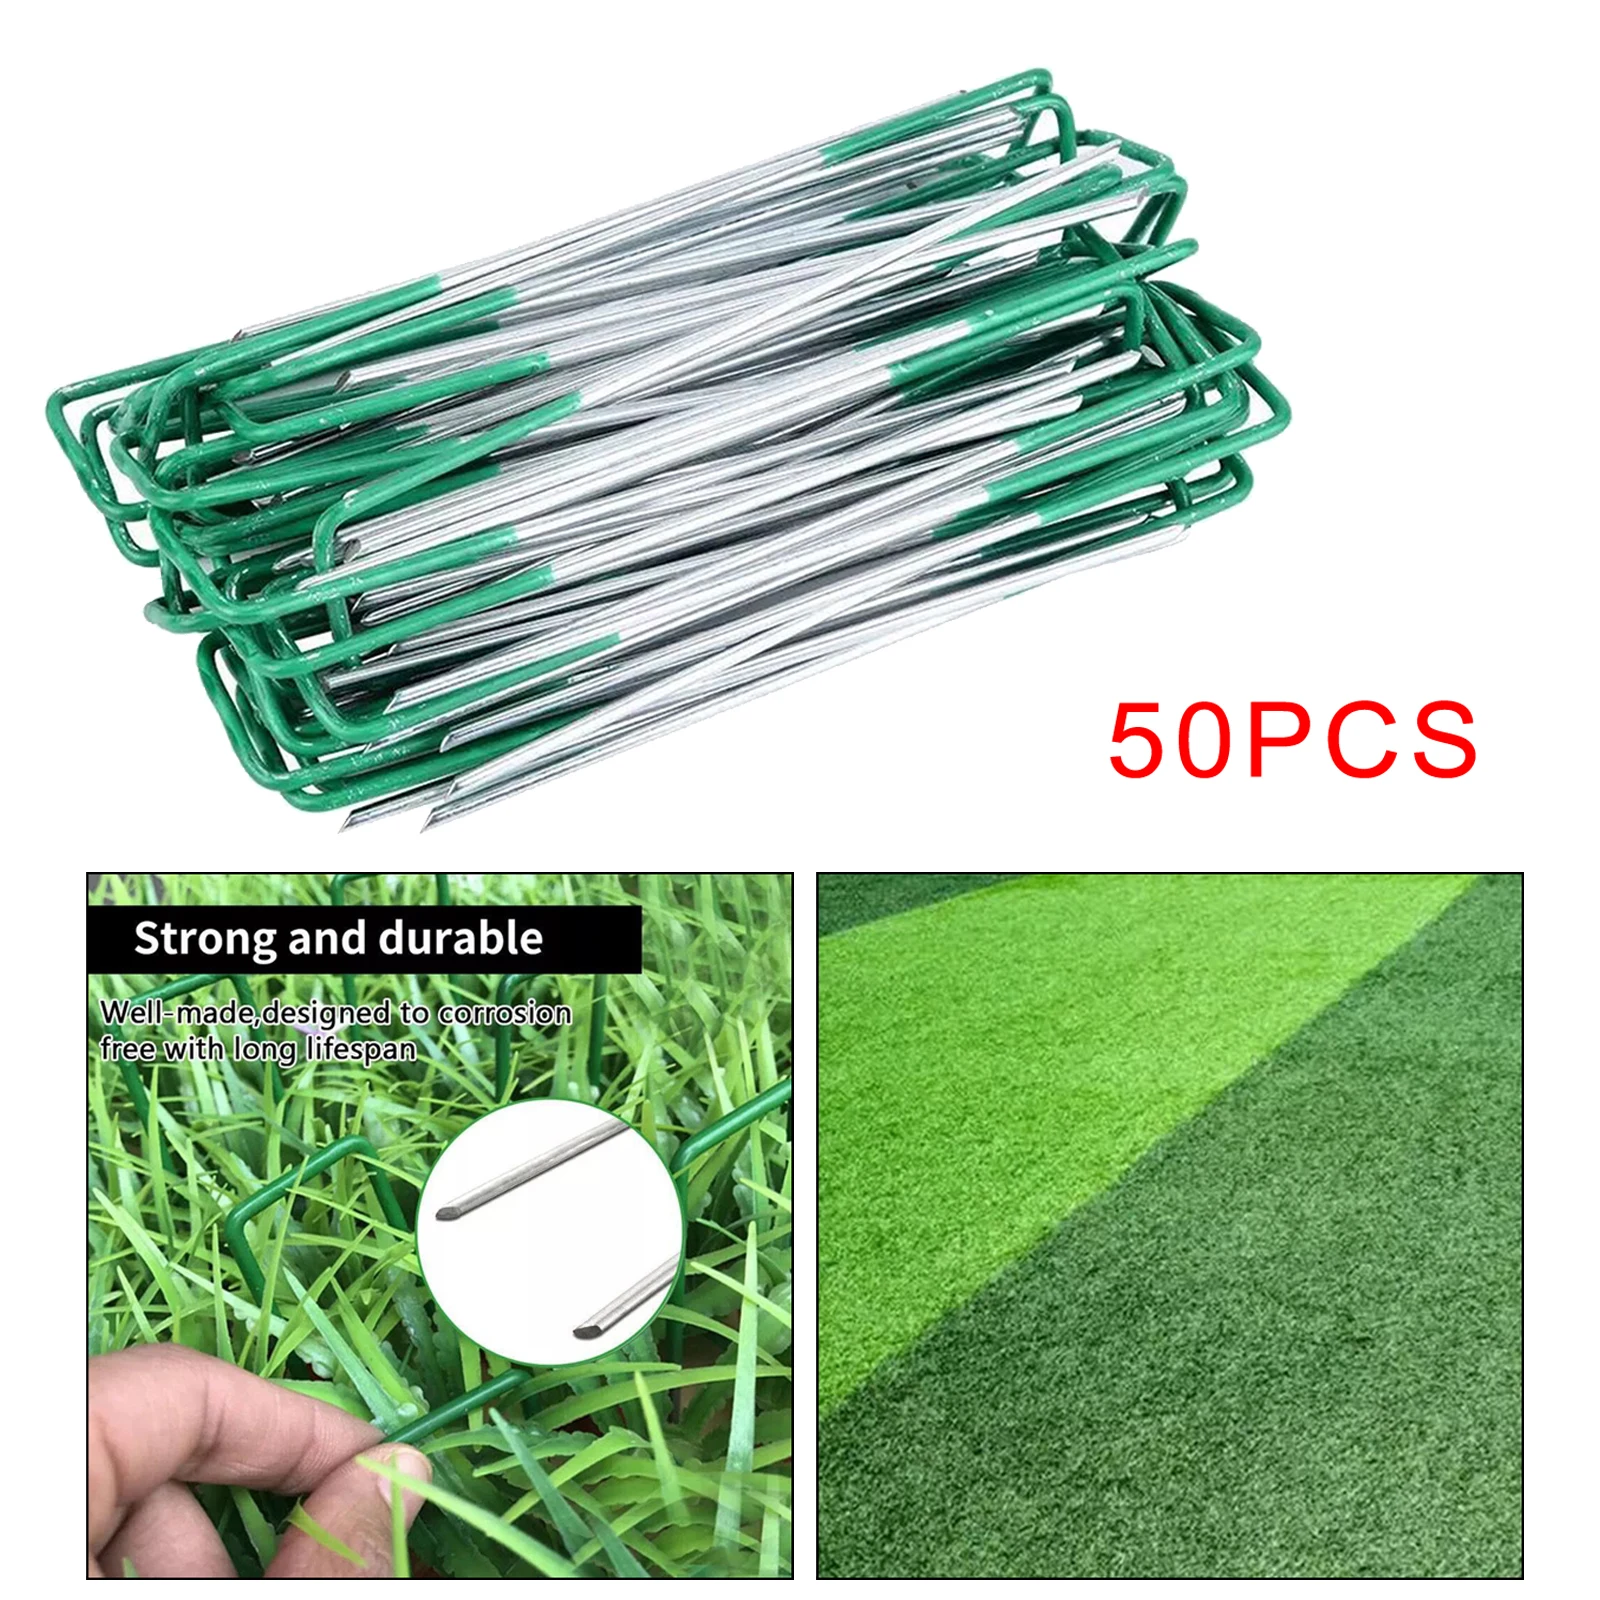 50Pieces Garden U-Type Ground Nails Insert Landscape Staples Lawn Tent Stakes Fence Anchors Fixing for Weed Barrier Fabric